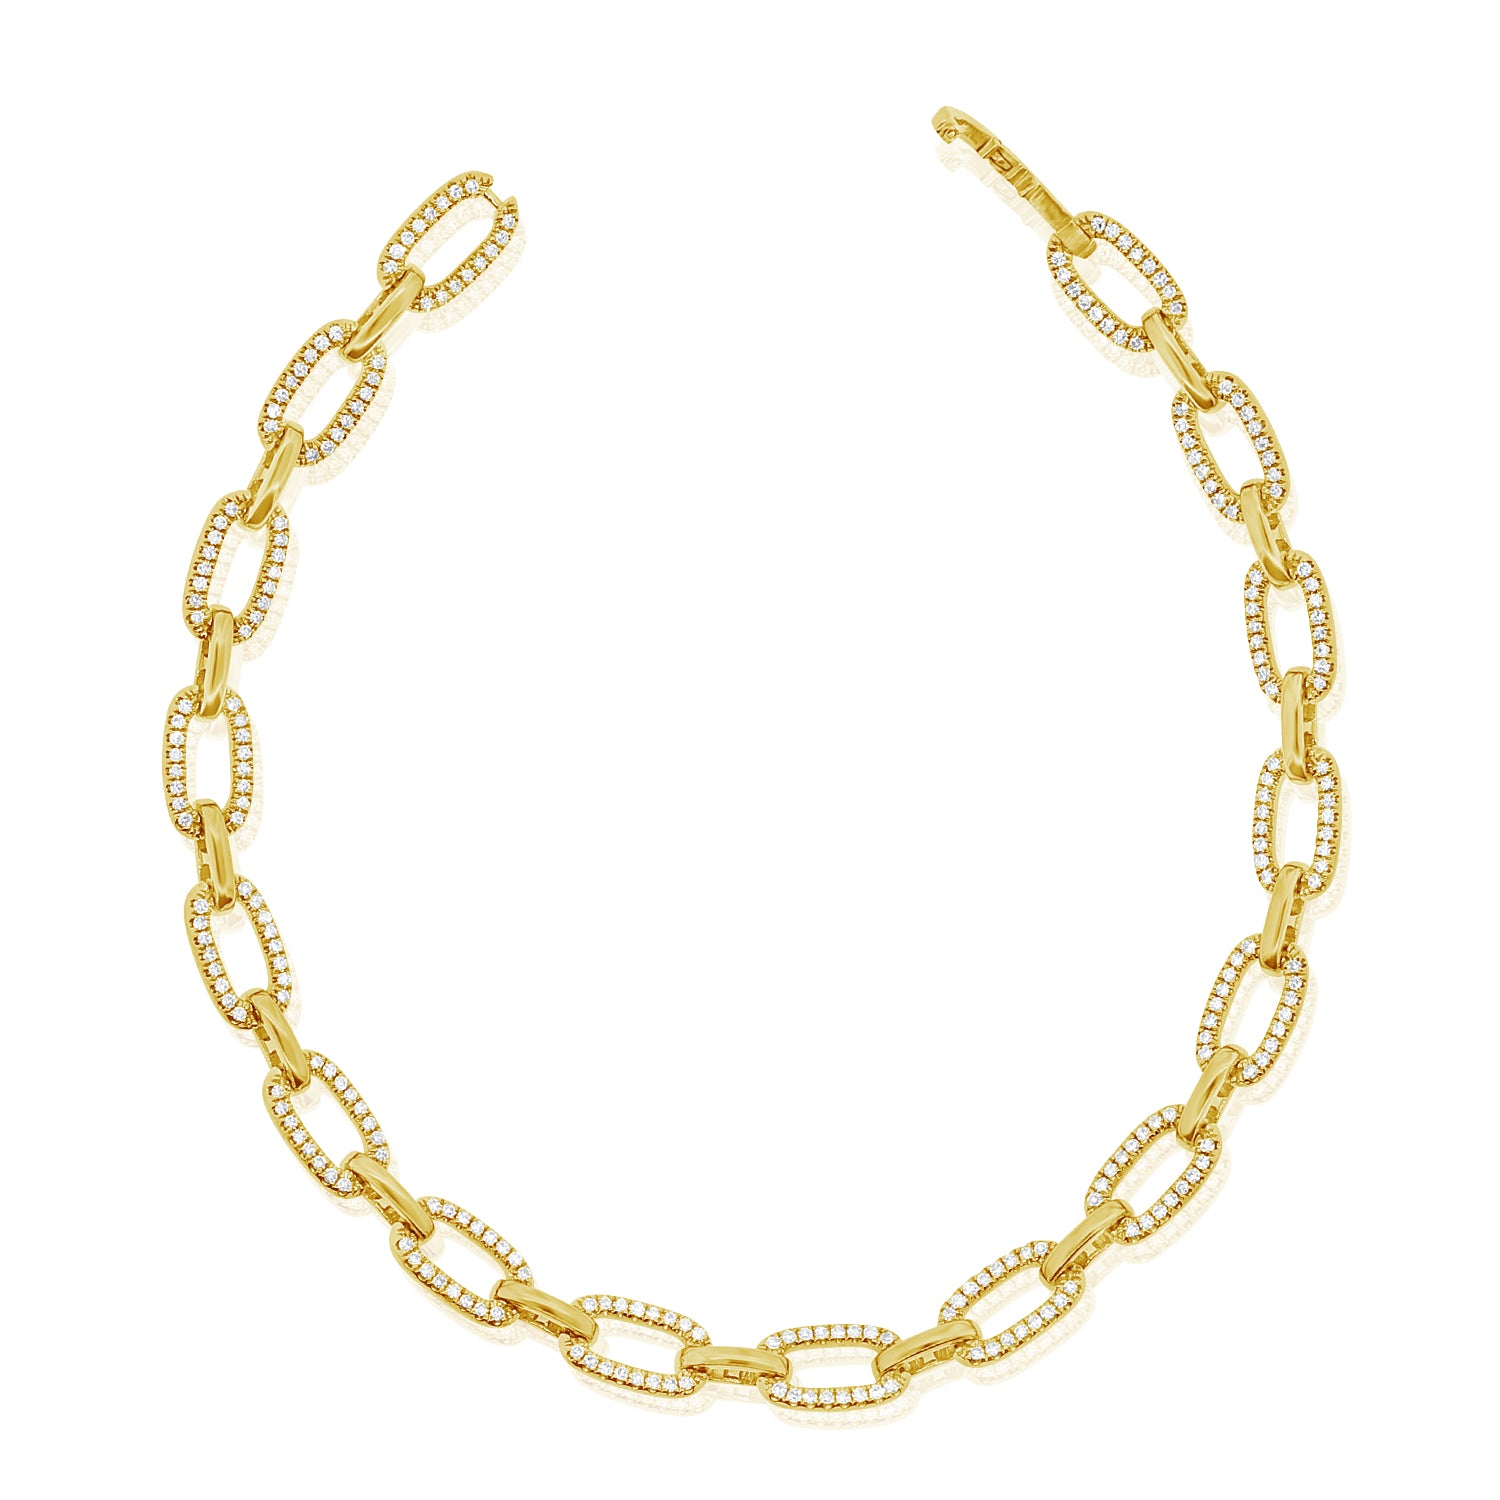 Circle Chain & Pave Link Bracelet, Yellow Gold